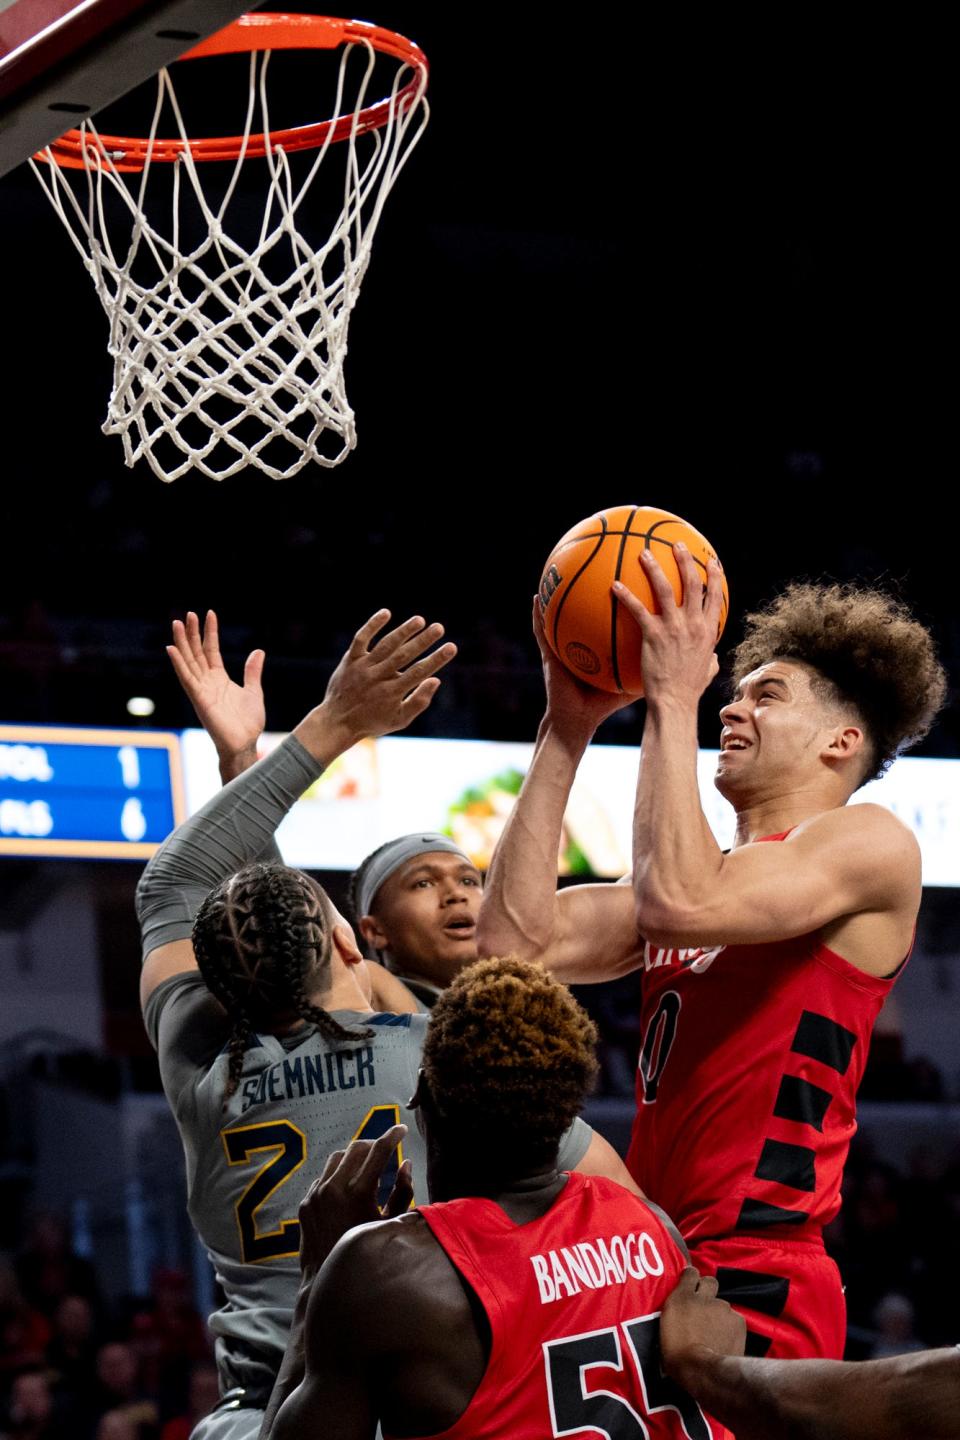 Bearcats guard Dan Skillings Jr. scored 17 points in UC's 92-56 victory over West Virginia  Saturday. Tuesday, the squads will square off for a third time, this time in the Big 12 tournament.